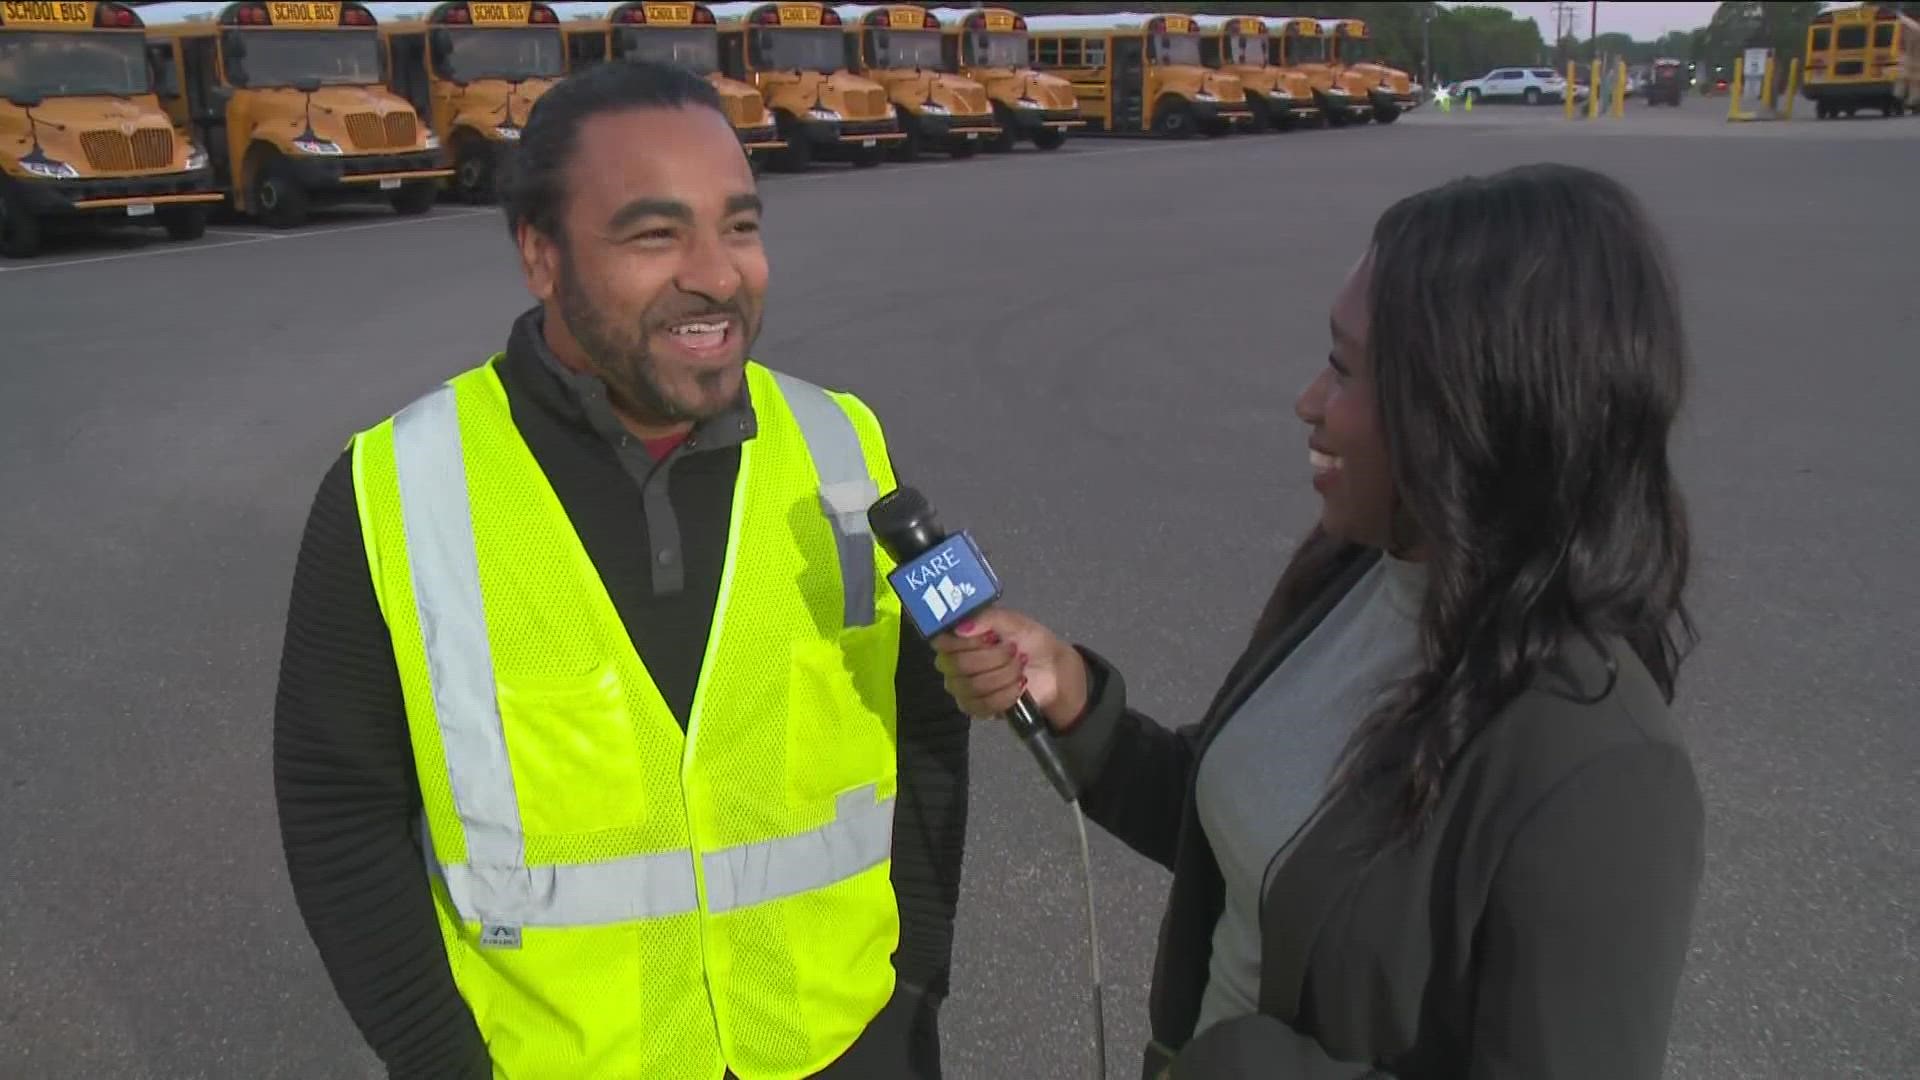 On Tuesday morning KARE 11 spoke with a bus trainer as local companies struggle to hire more drivers.